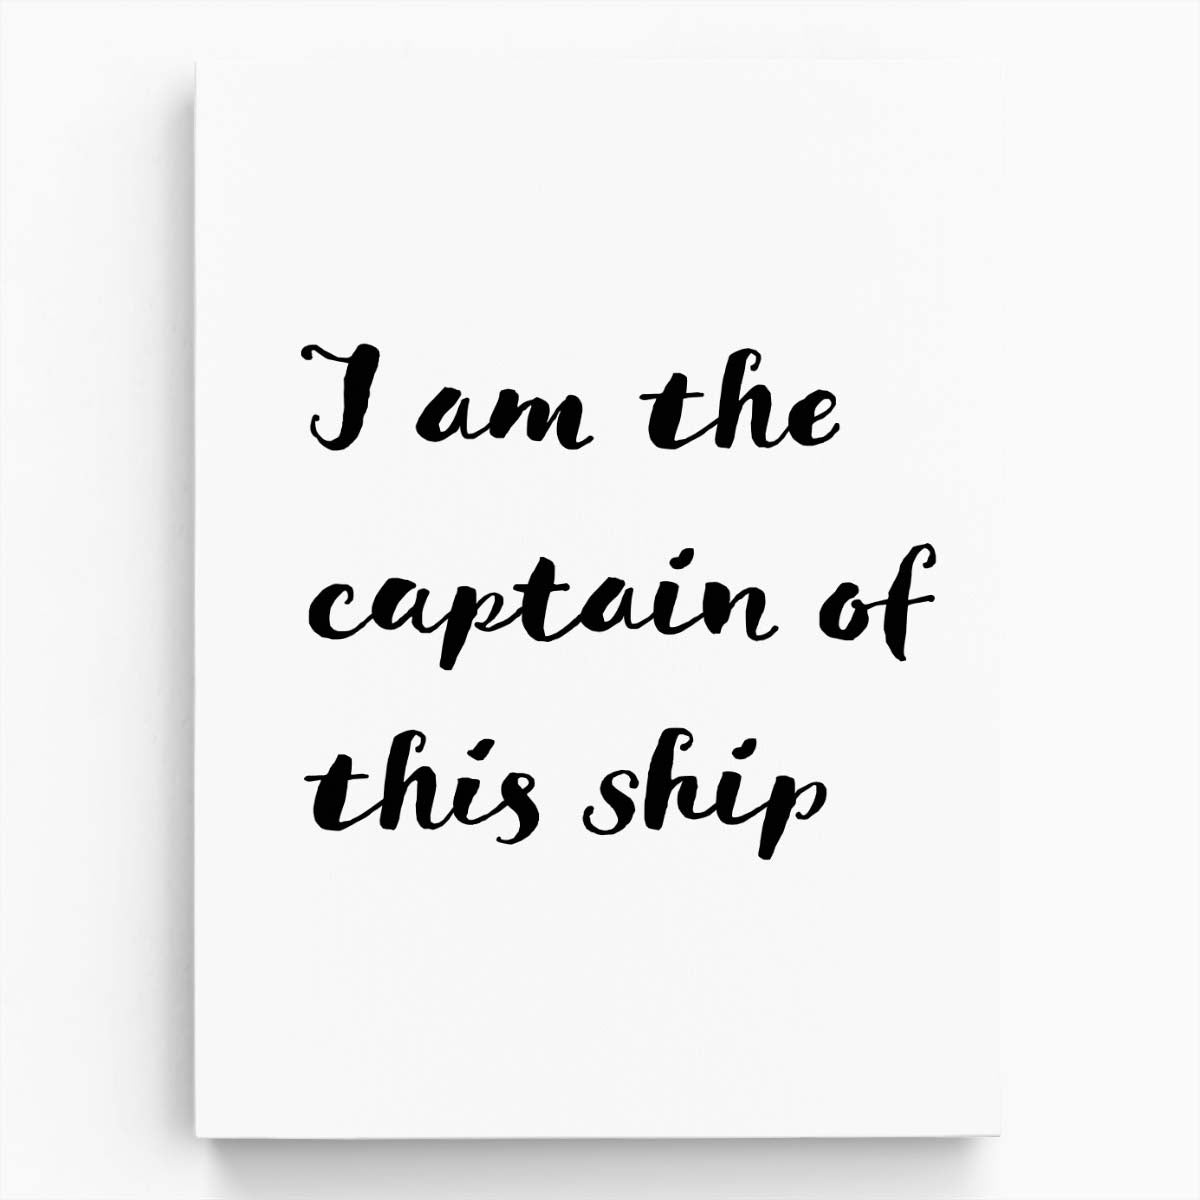 Monochrome Ship Captain Motivational Quote Illustration Art by Luxuriance Designs, made in USA